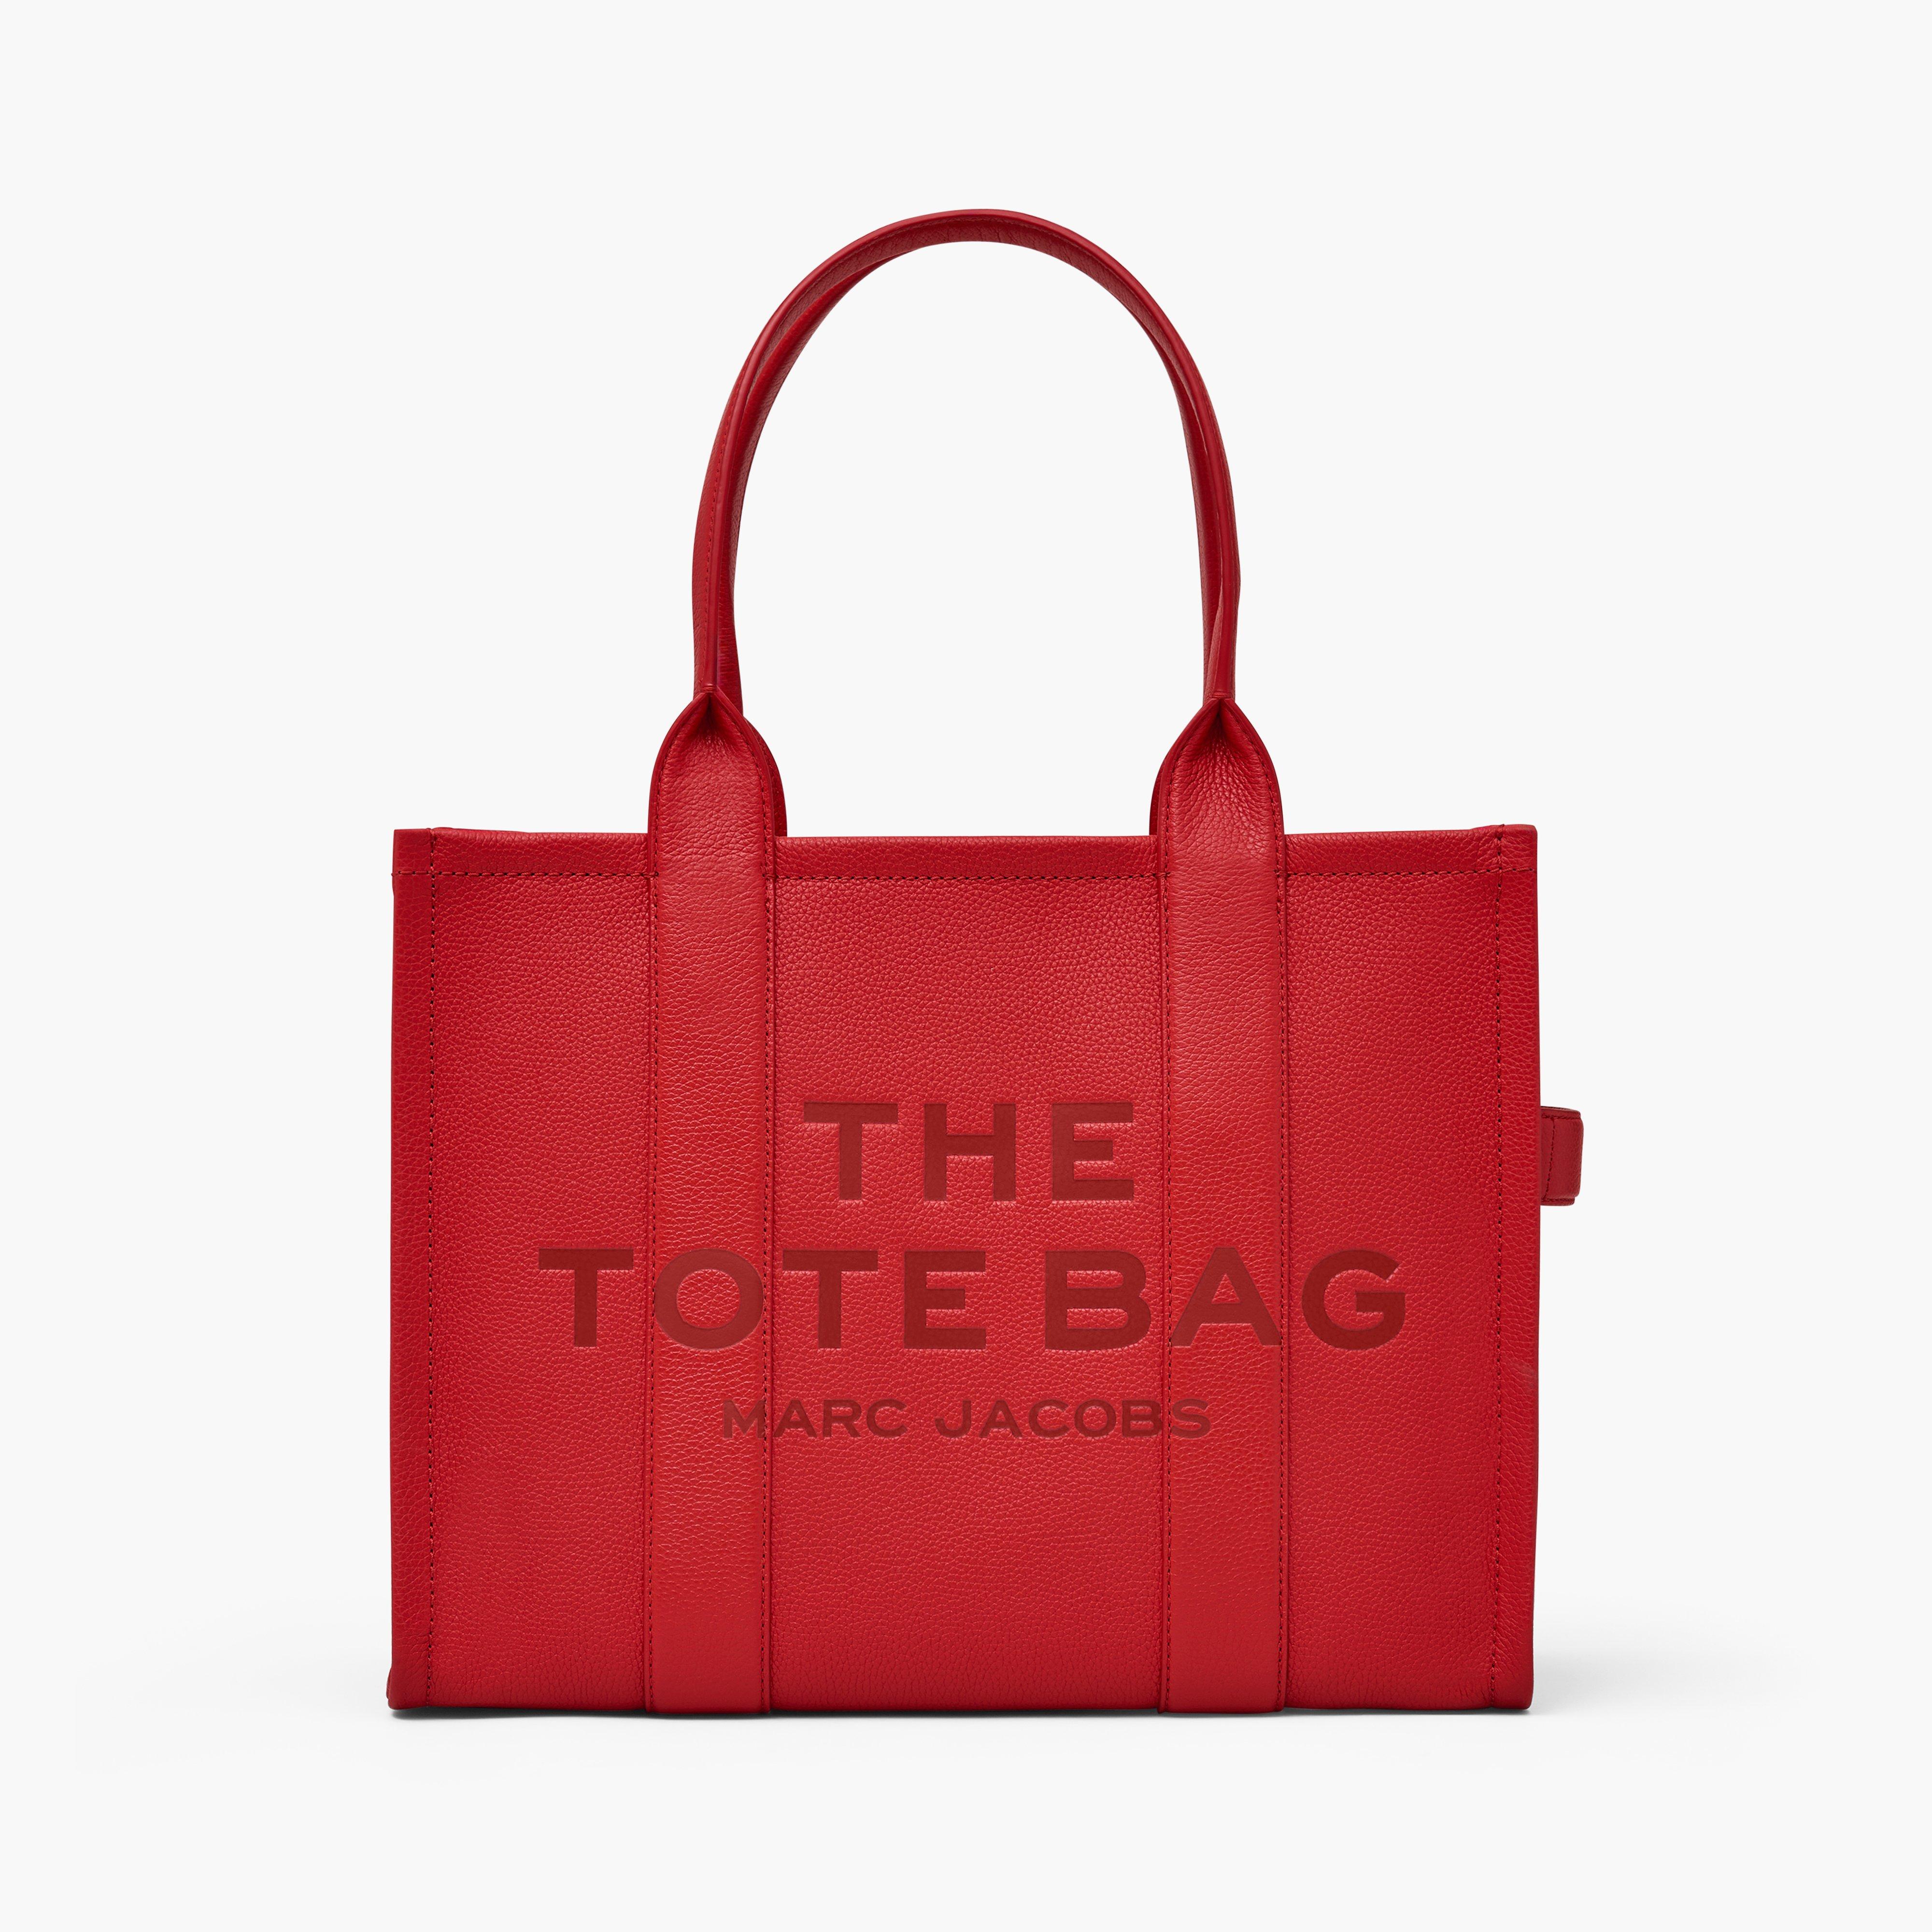 Marc by Marc jacobs The Leather Large Tote Bag,TRUE RED